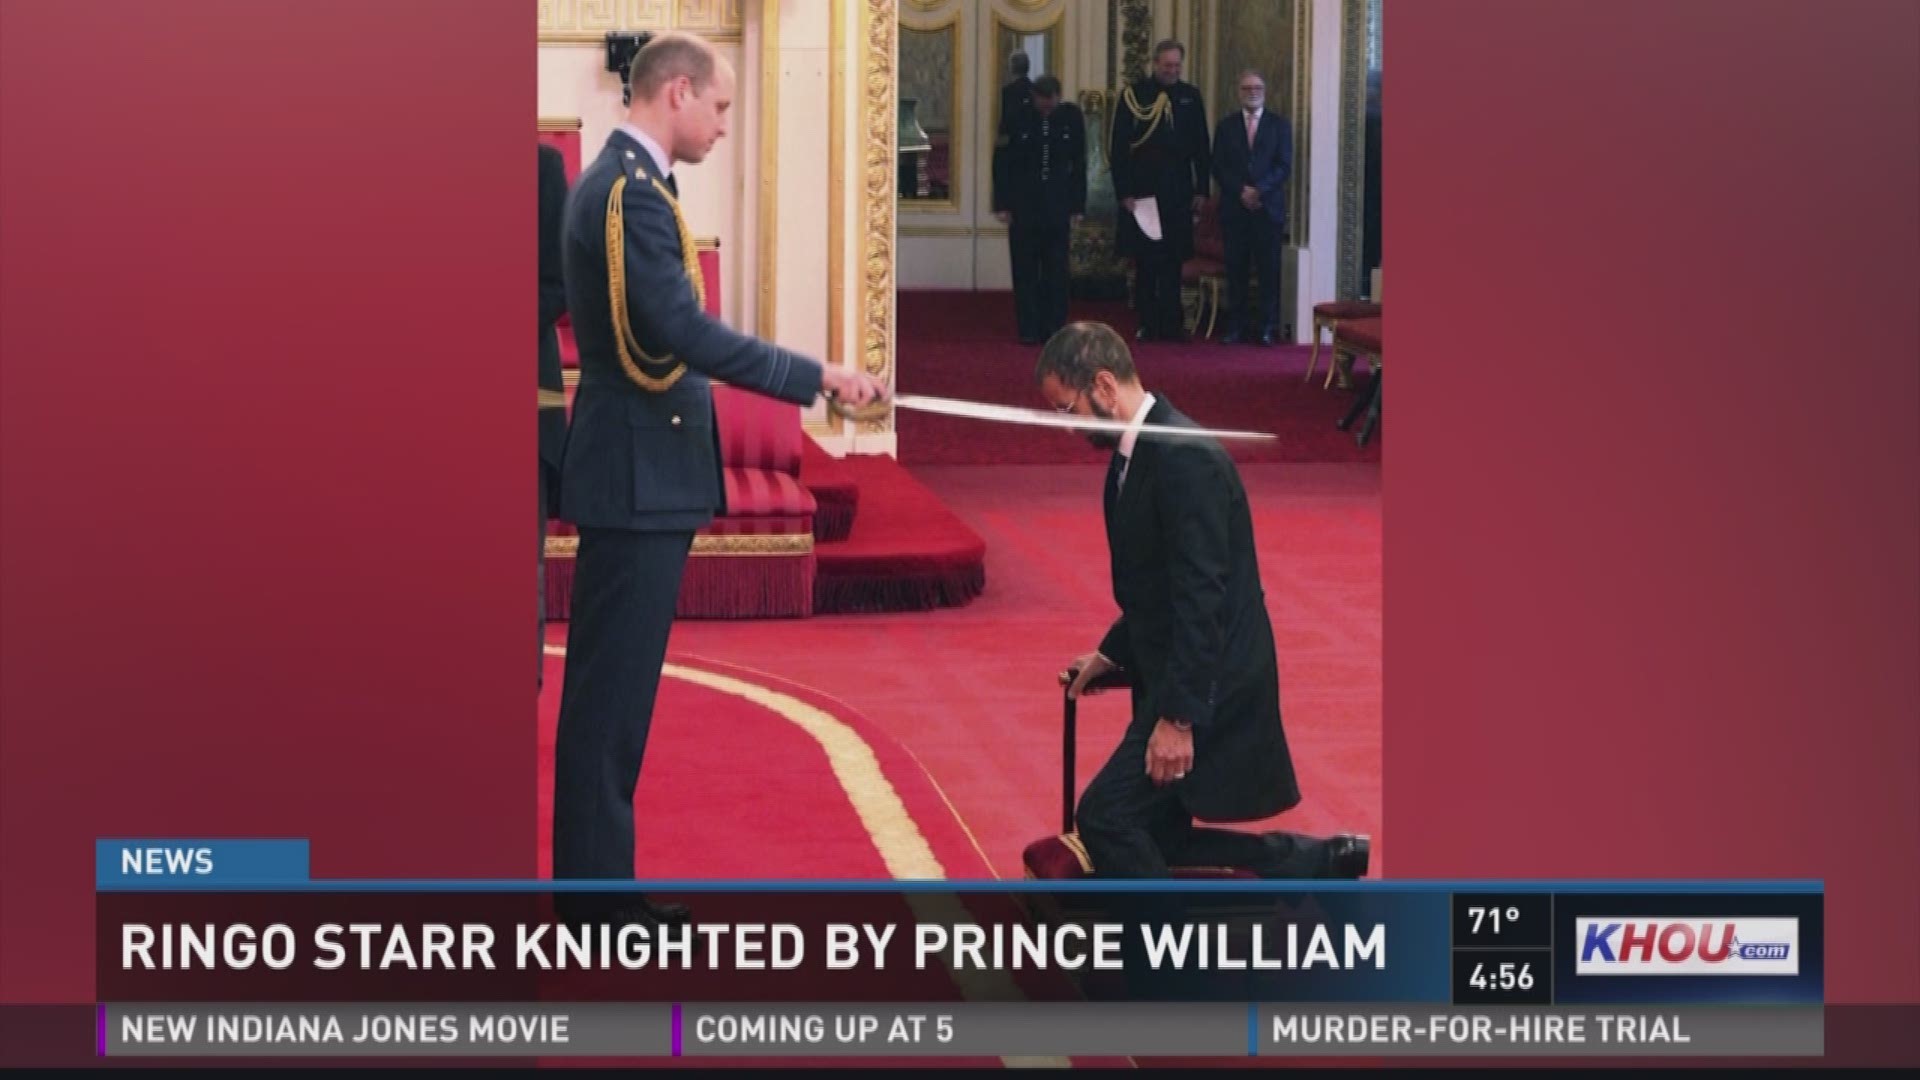 Beatle Ringo Starr was knighted Tuesday by Prince Williams.